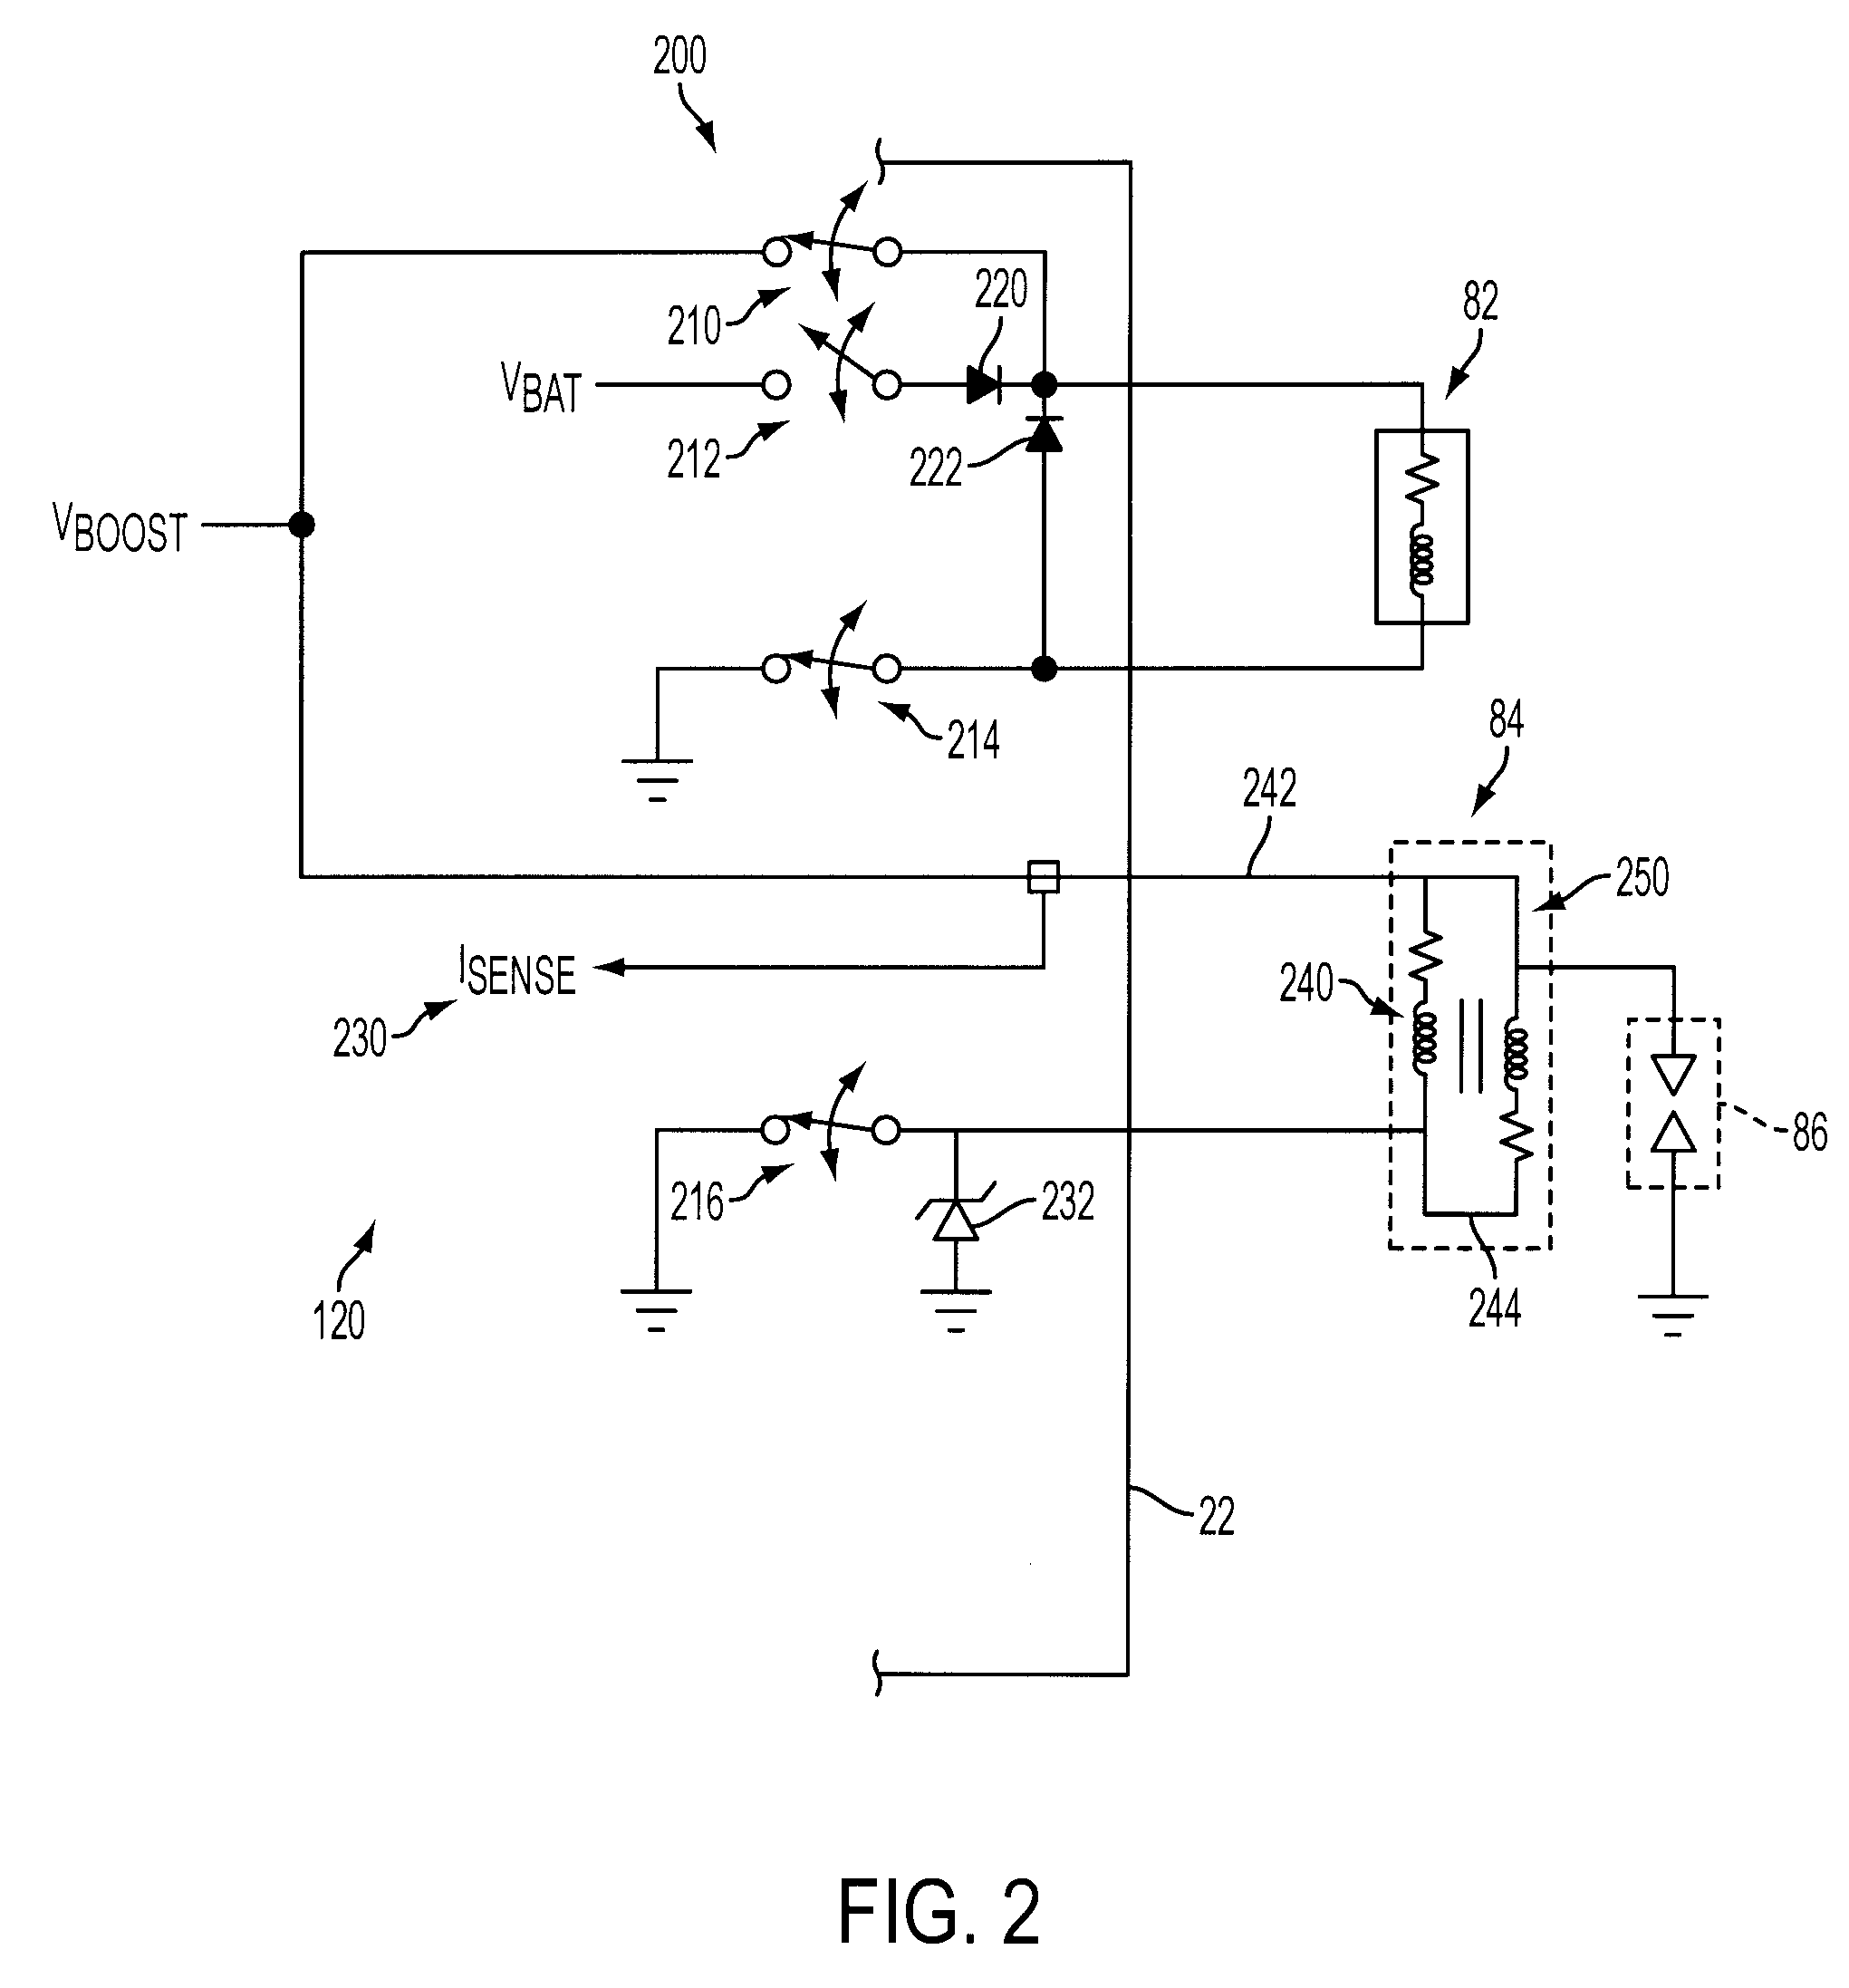 Internal Combustion Engine Having Common Power Source For Ion Current Sensing and Fuel Injectors